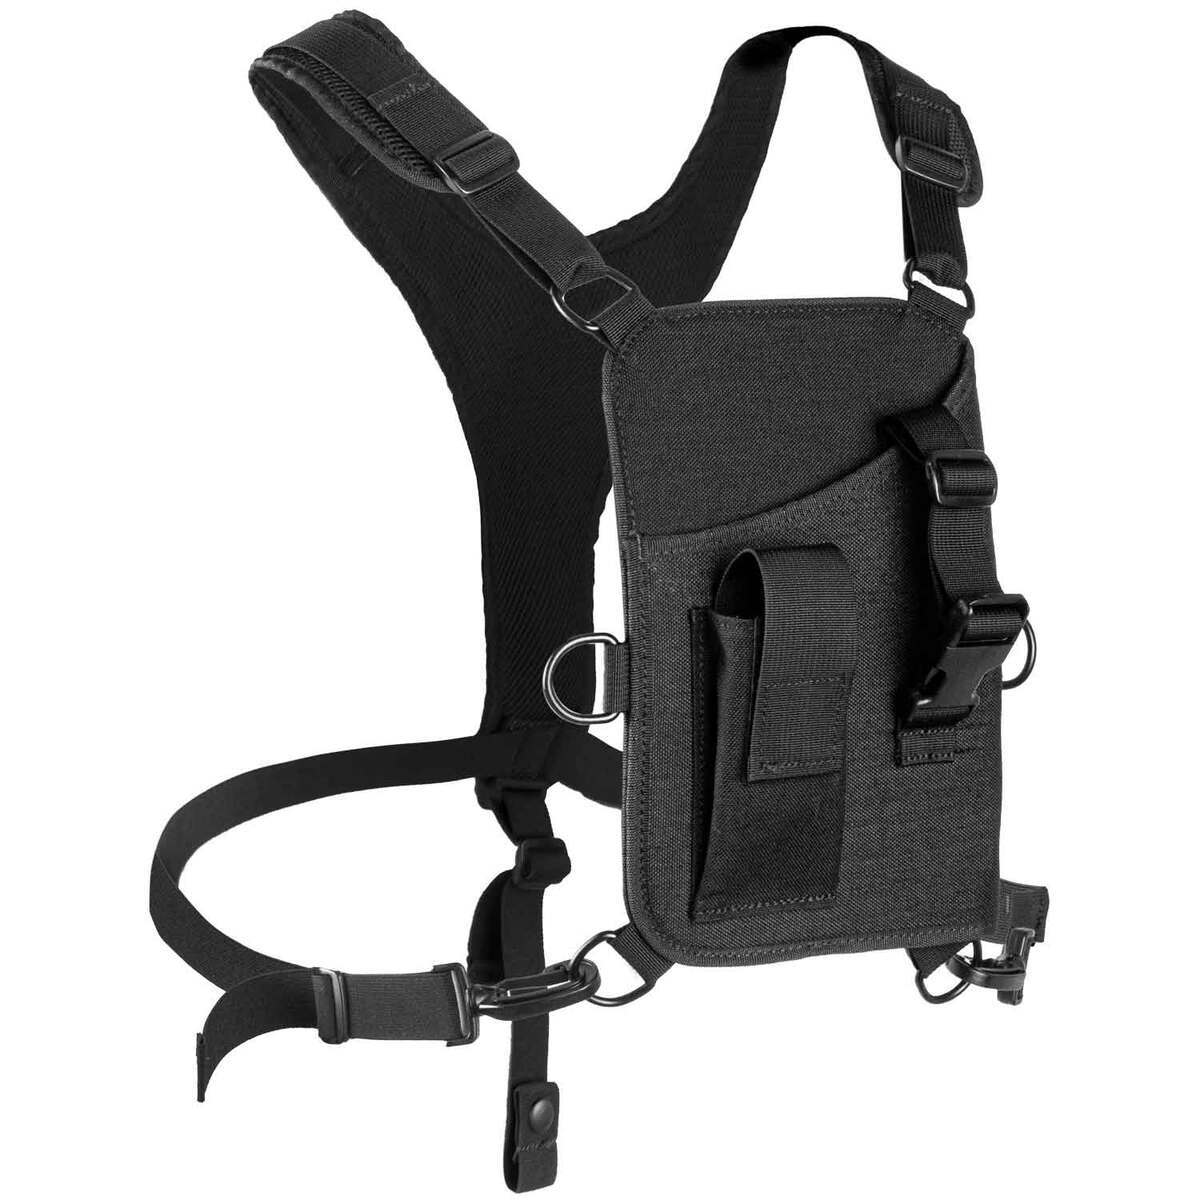 Vital Impact Trail Pack Chest Holster For Semi- Autos - Black